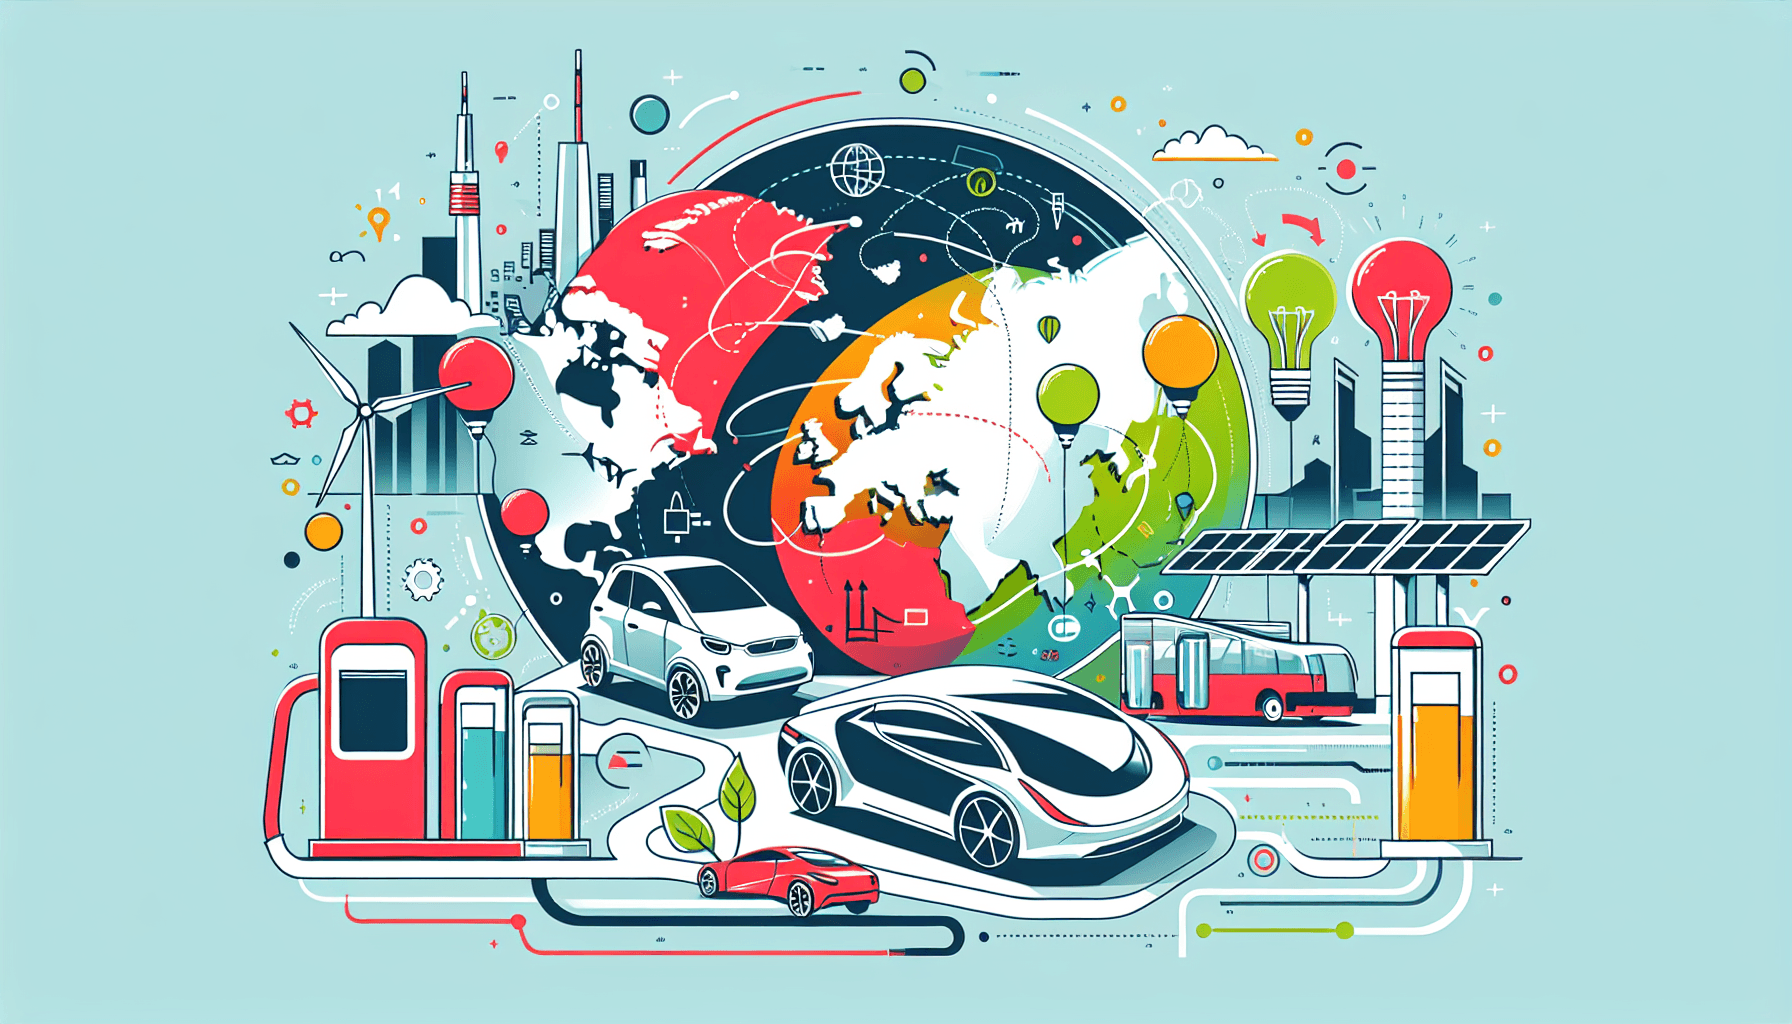 Tesla's strategy successful in flat illustration style and white background, red #f47574, green #88c7a8, yellow #fcc44b, and blue #645bc8 colors.